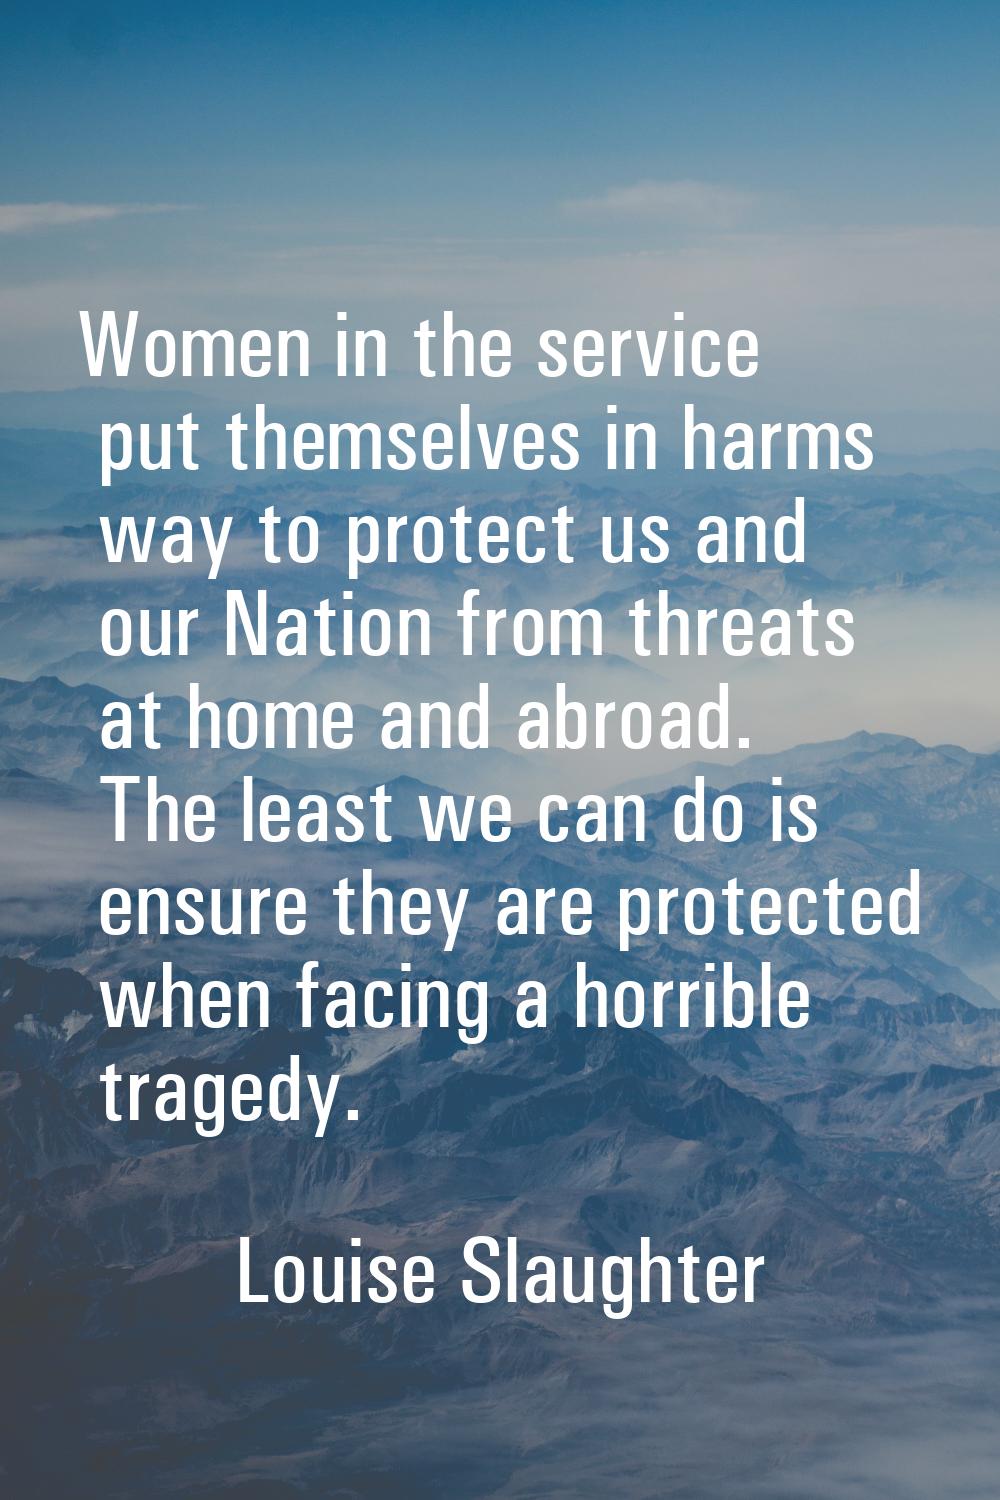 Women in the service put themselves in harms way to protect us and our Nation from threats at home 